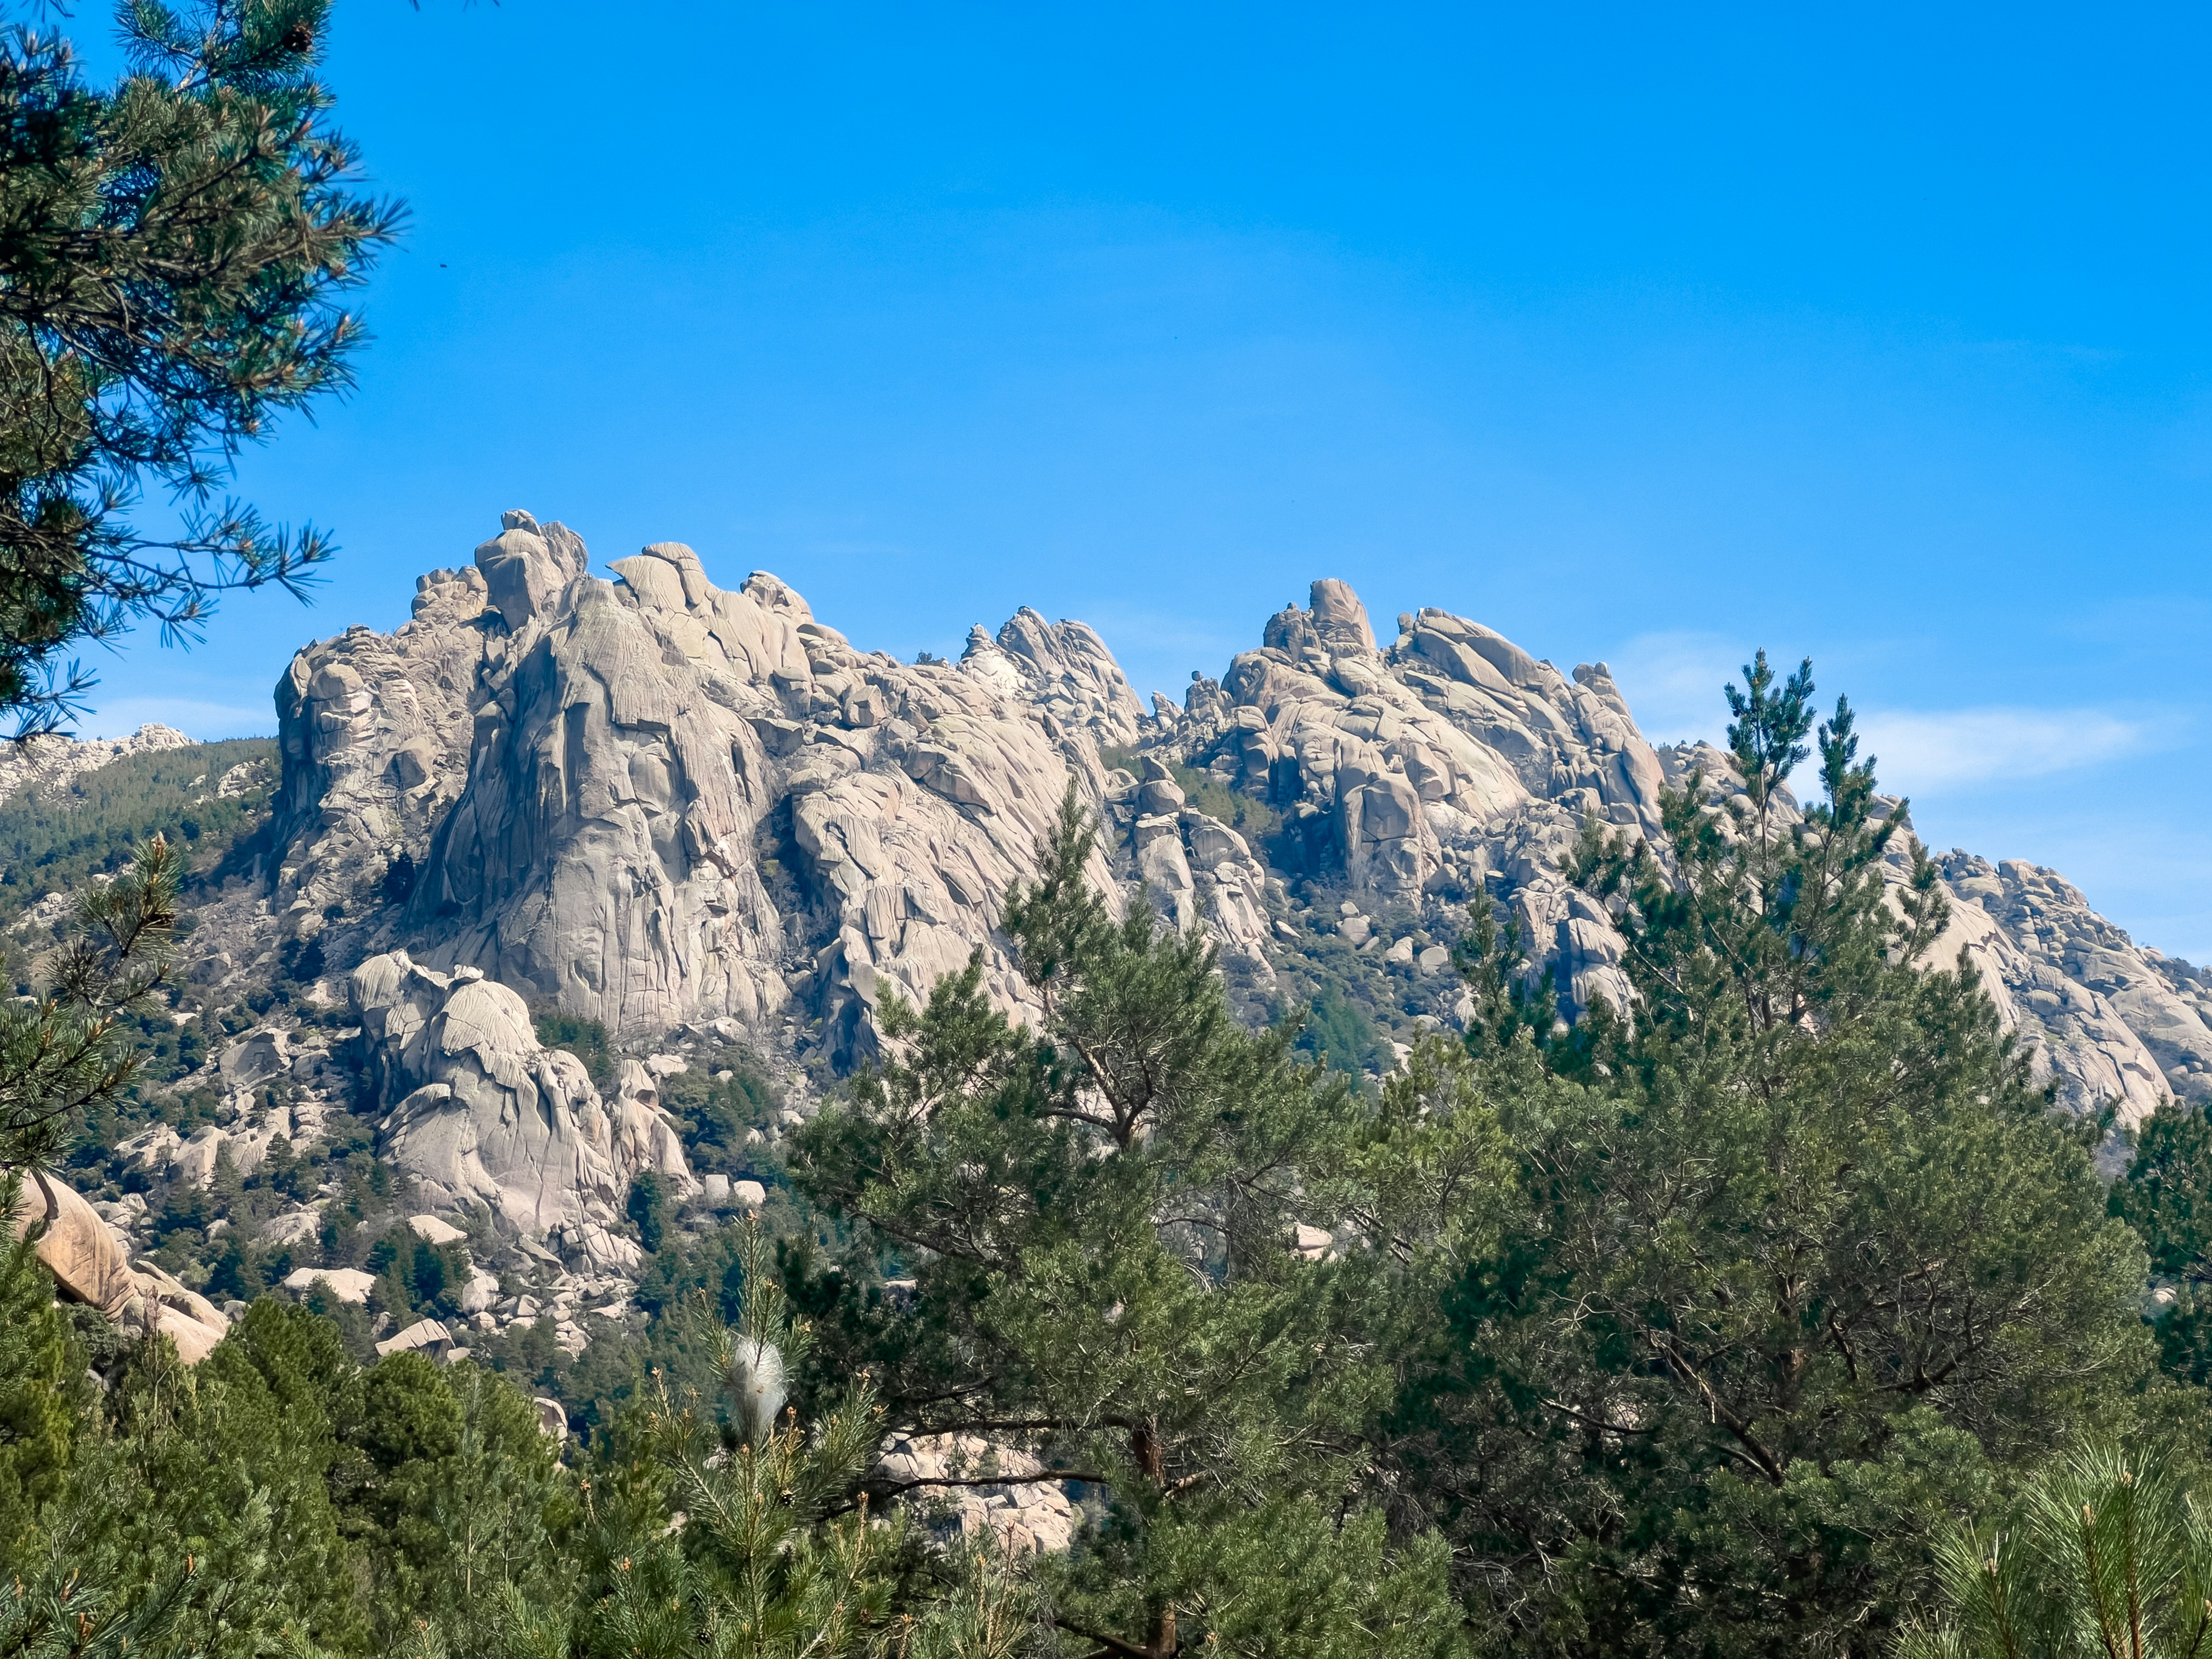 a mountain range with trees and rocks in the foreground